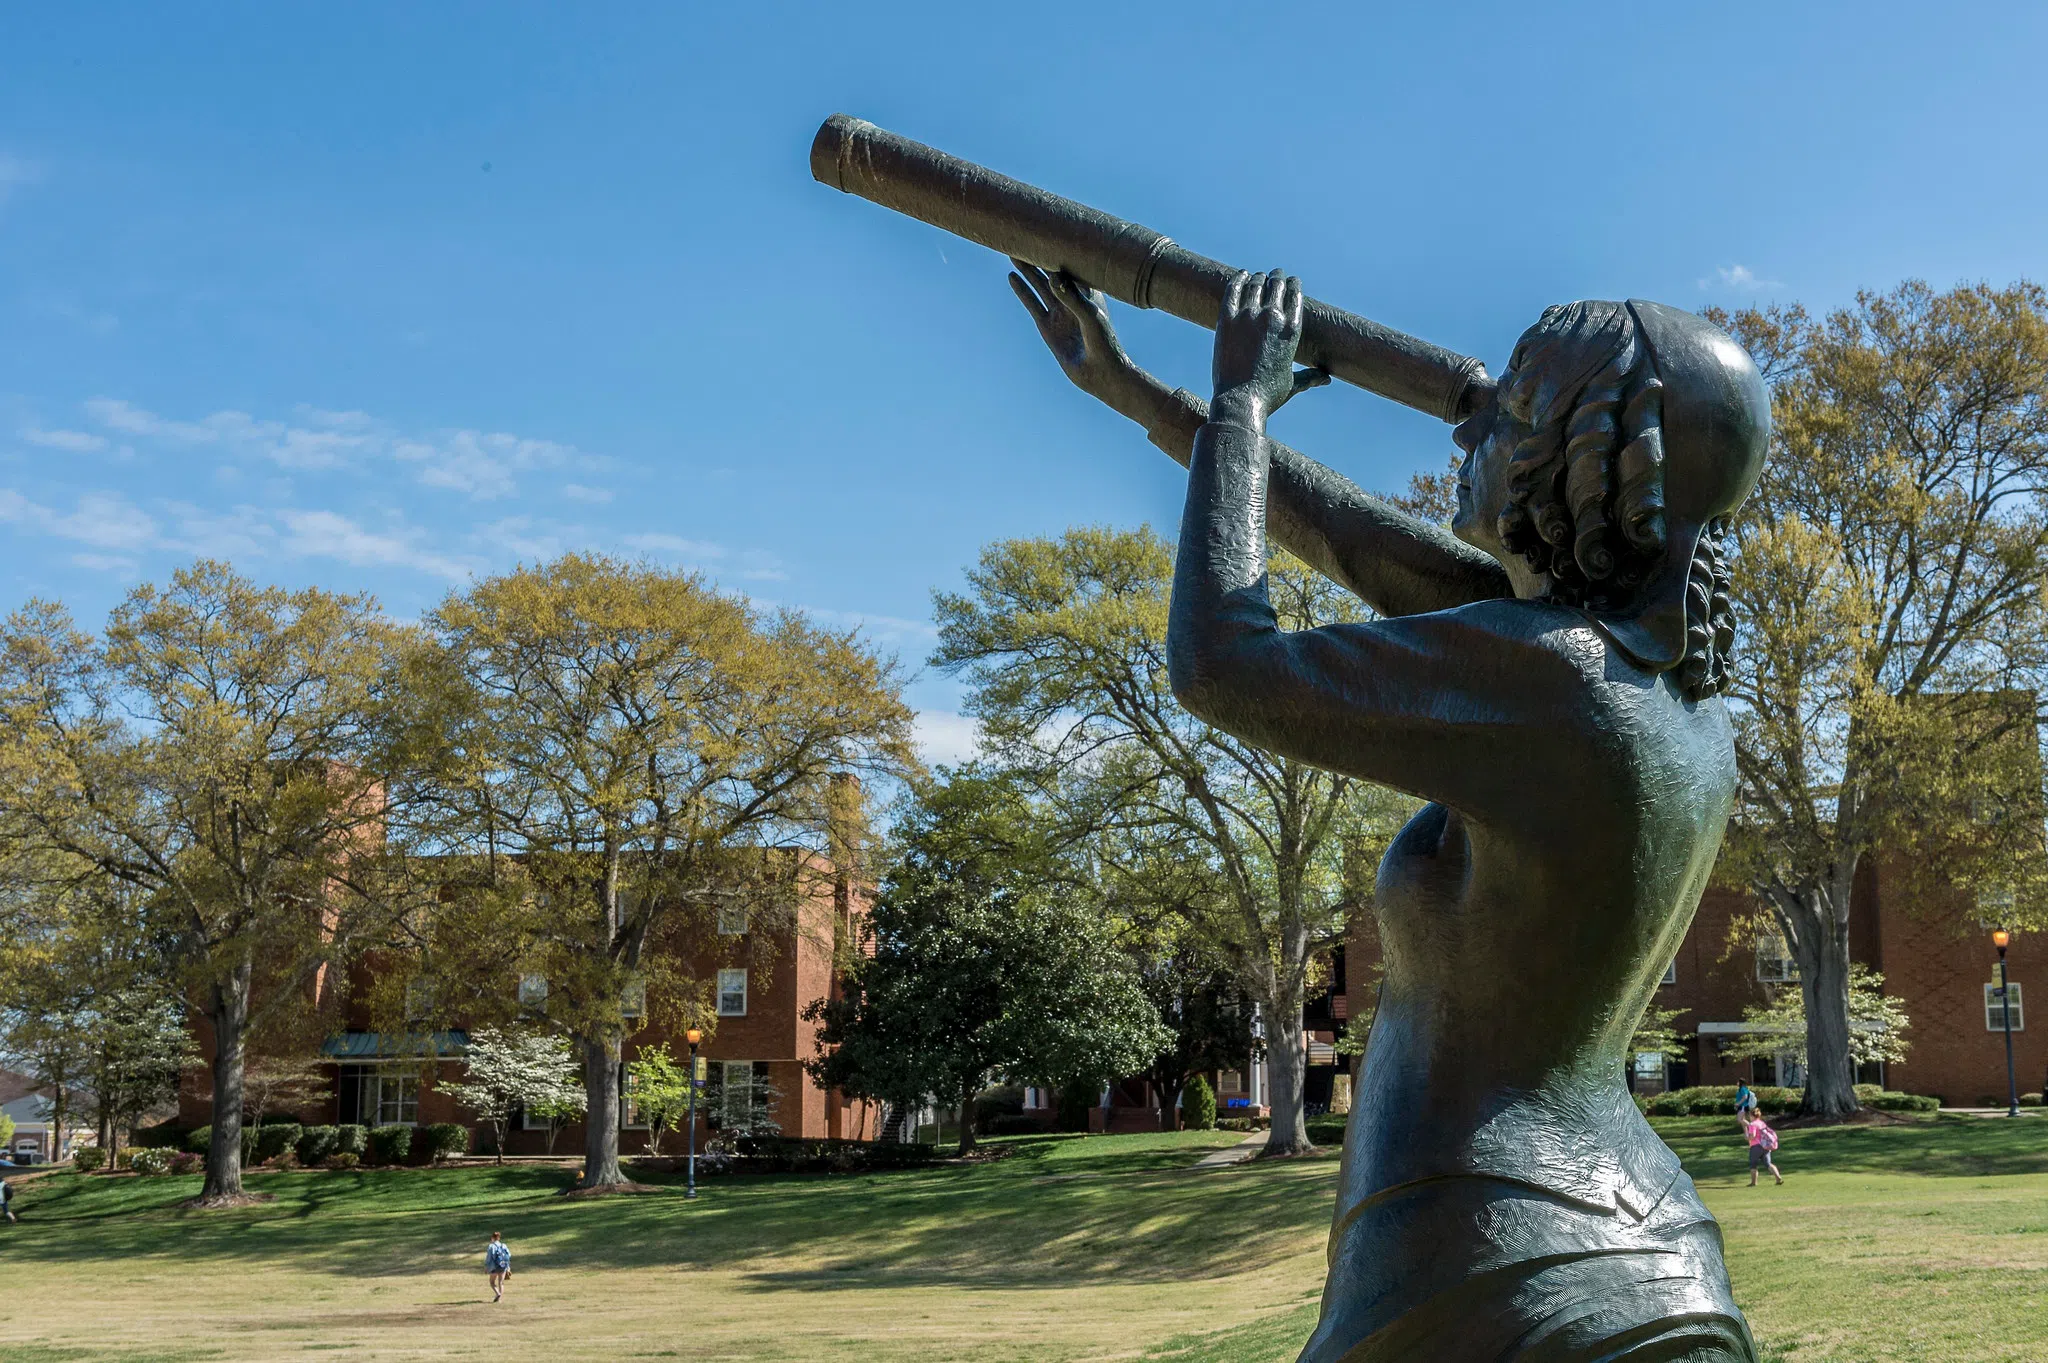 Bronze sculpture of woman with telescope appears in the foreground, with a grassy field and three-story brick building in the background.